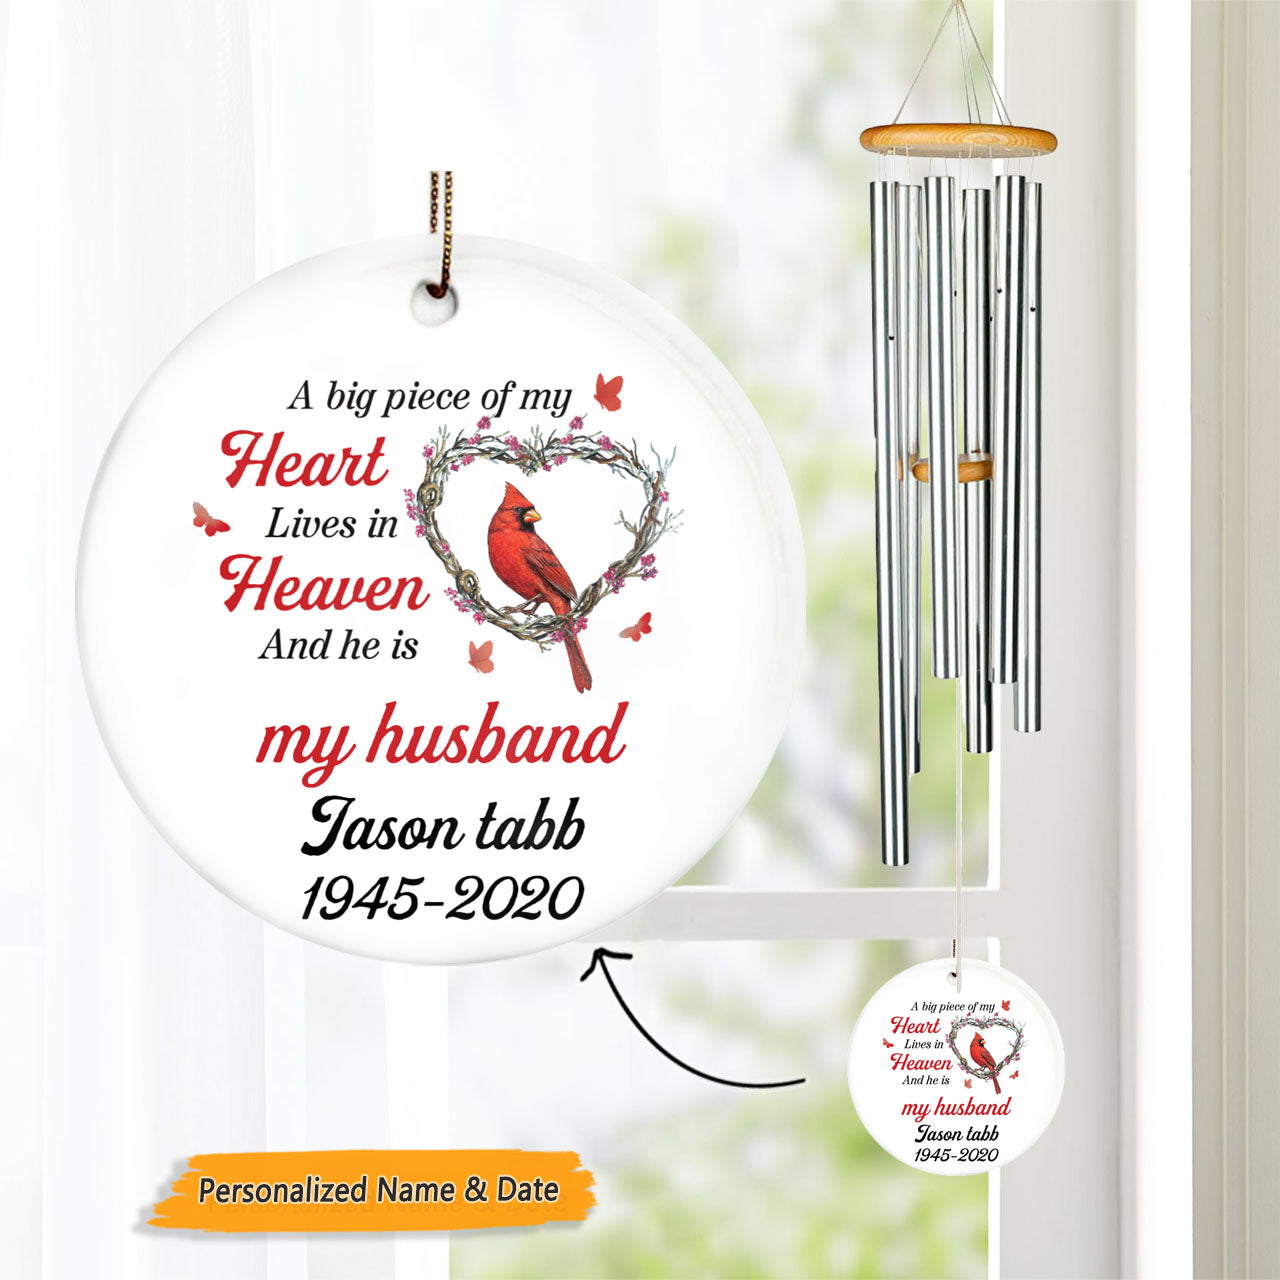 A Big Piece Of My Heart Lives In Heaven Cardinal Personalized Memorial Circle Ornament Wind Chime